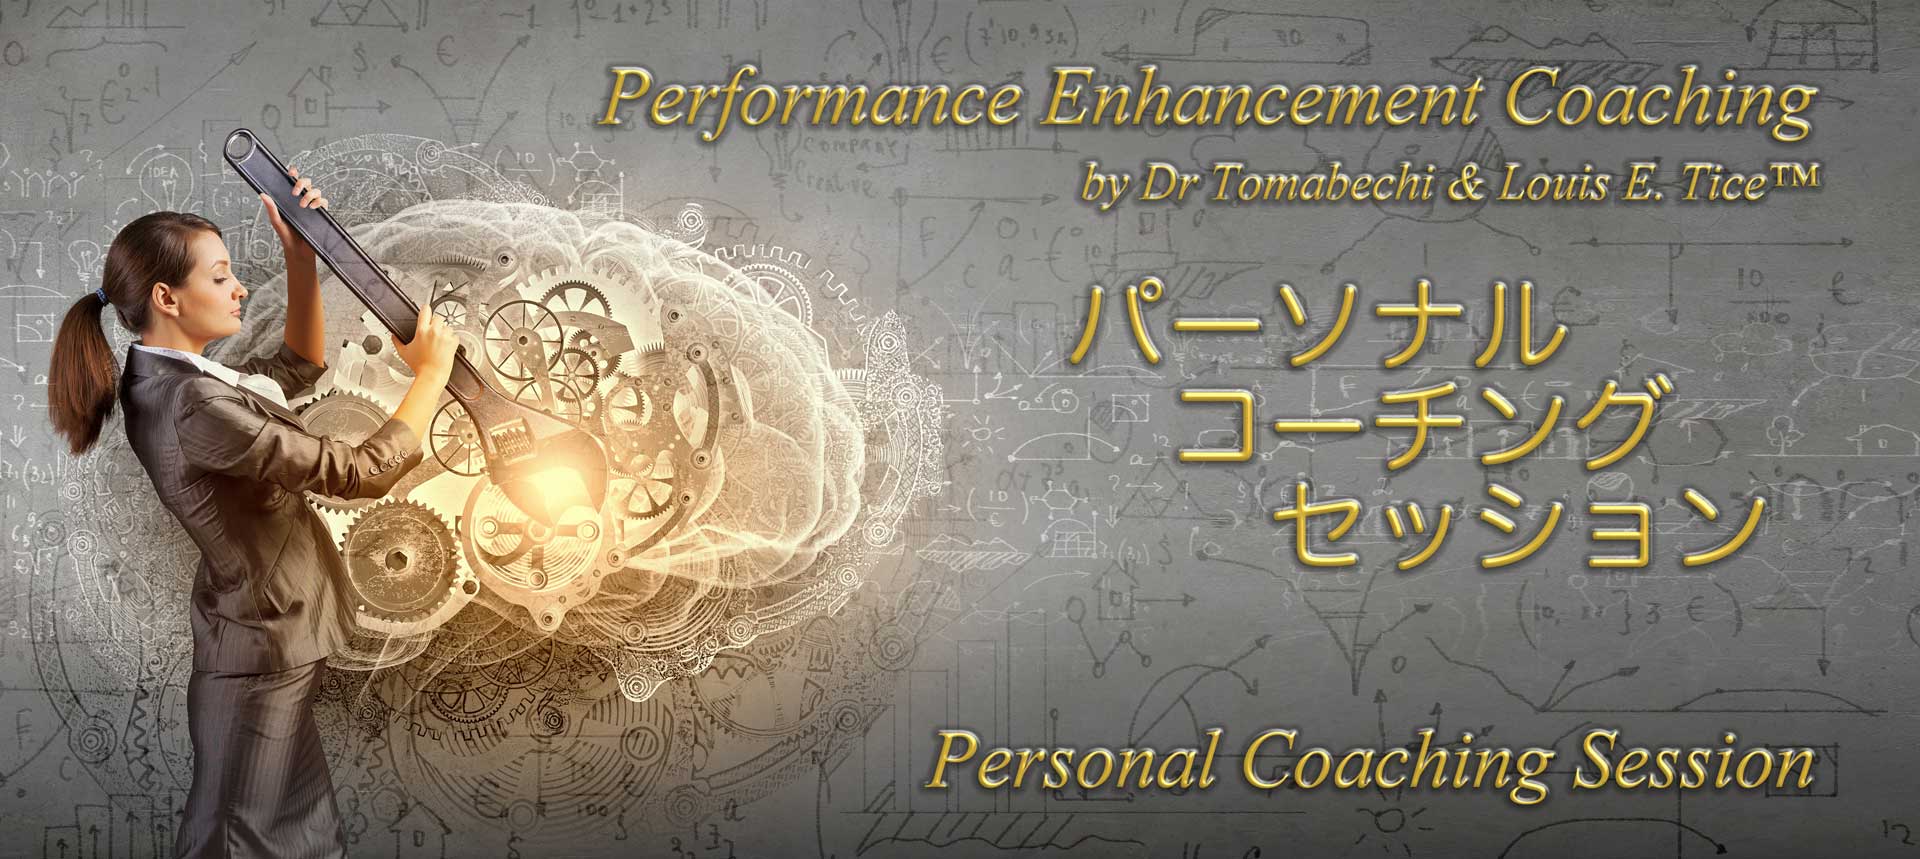 Performance Enhancement Coaching by Dr Tomabechi & Louis E. Tice™